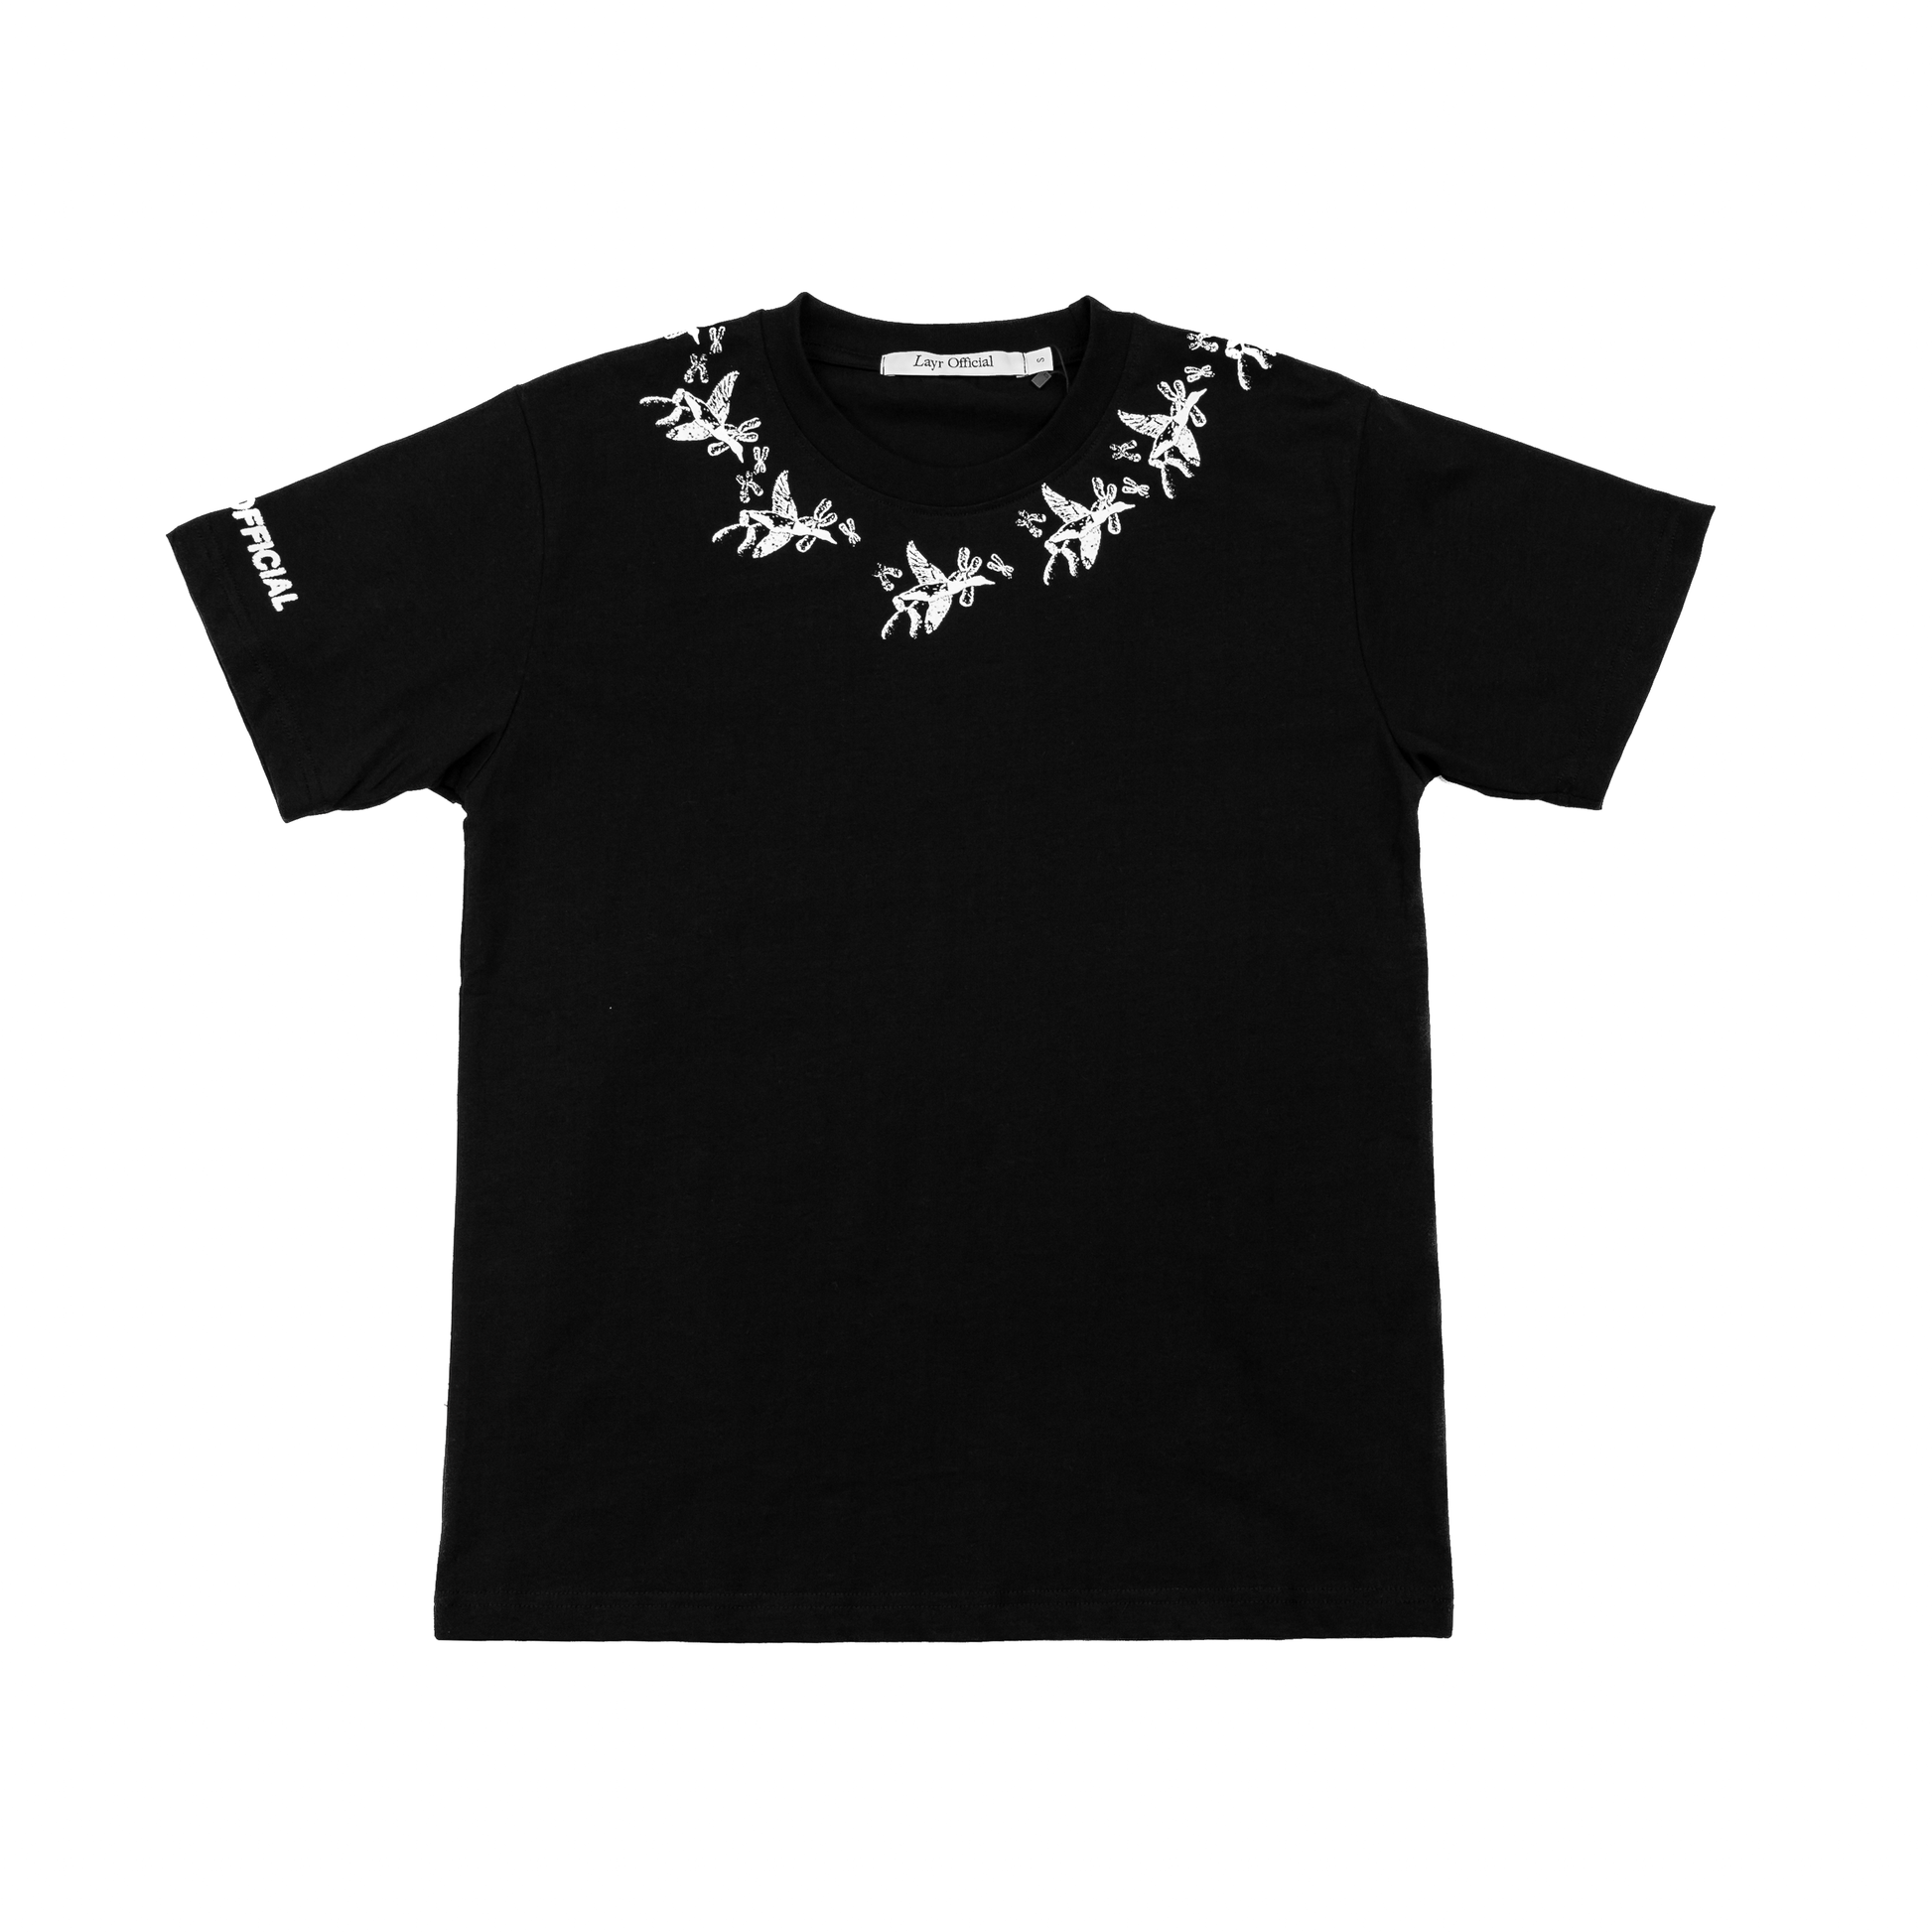 Flying Duck Neck Tee, Black - Layr Official